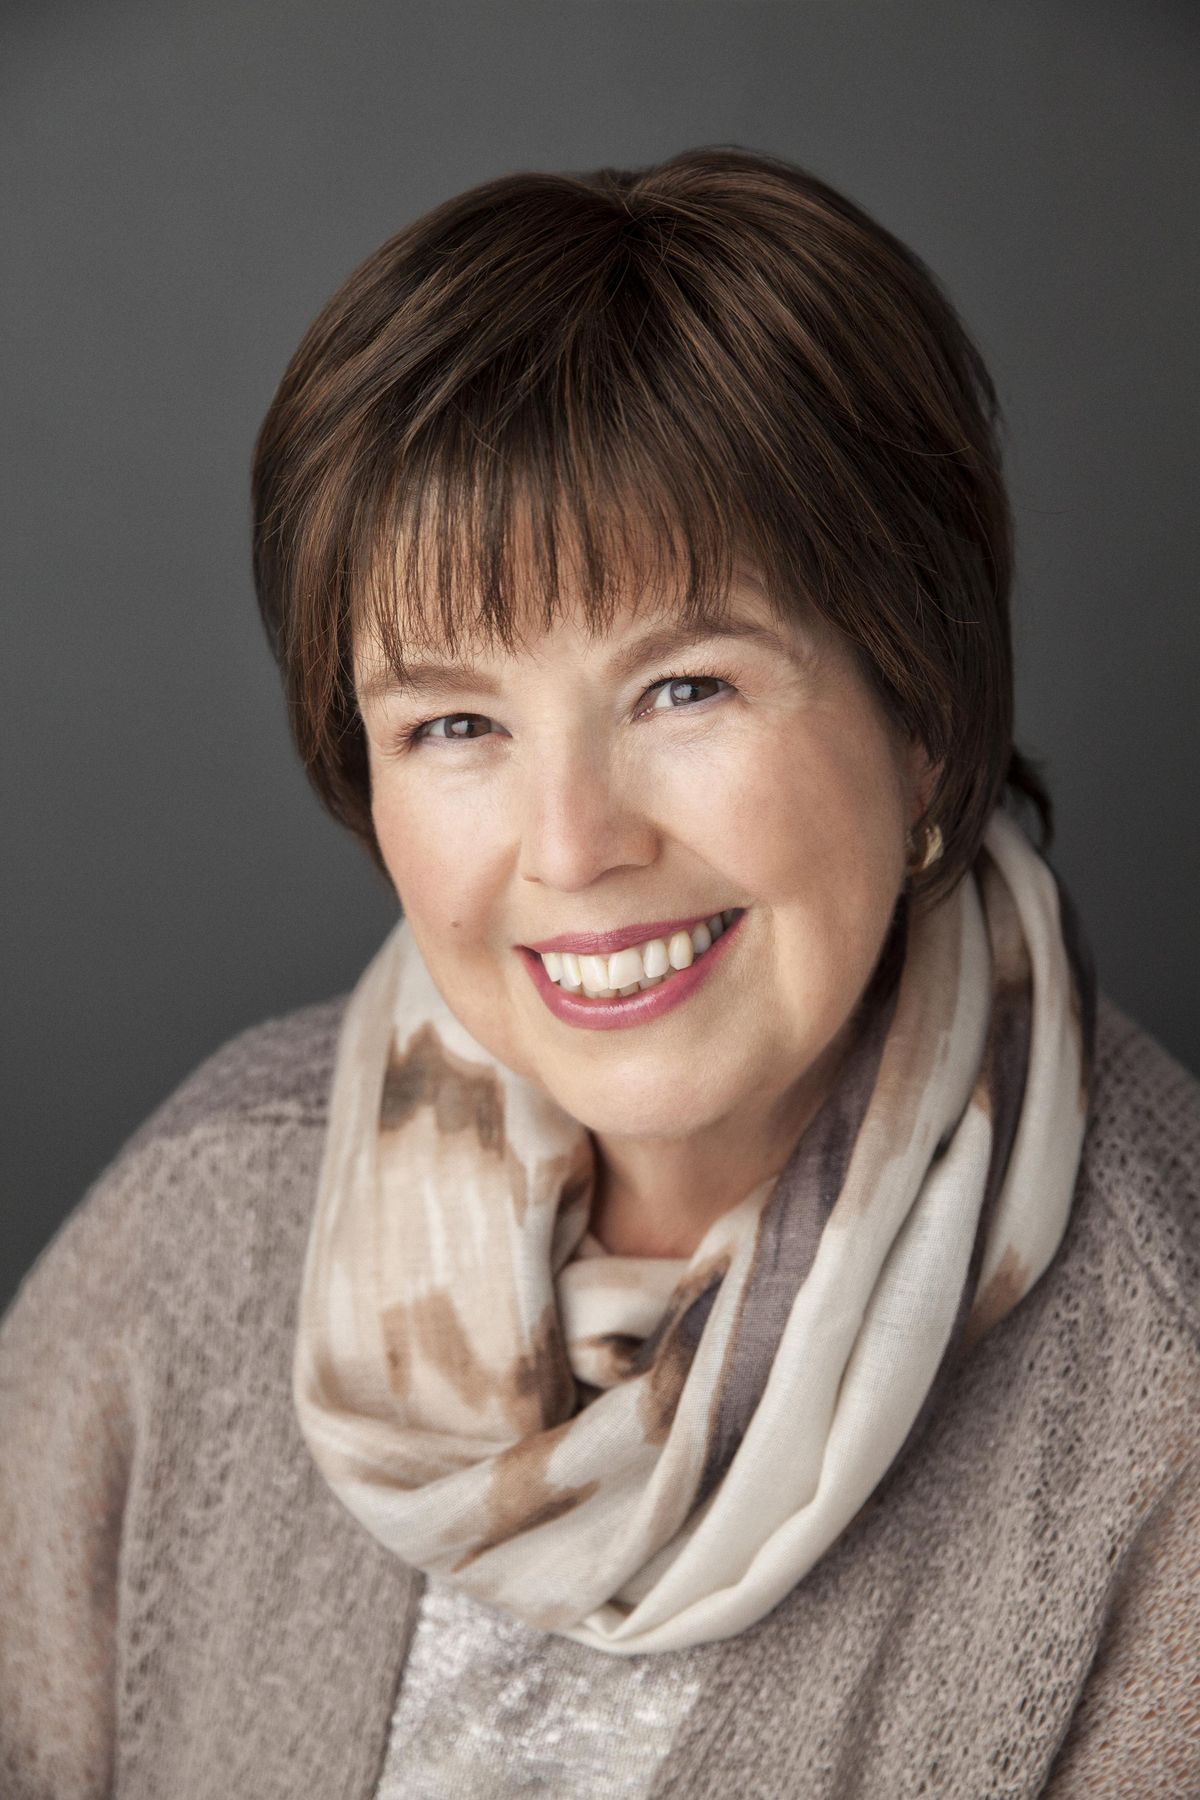 Best-selling author Debbie Macomber will be among the guest speakers at this weekend’s Food and Wine Festival at the Coeur d’Alene Resort. (Courtesy)